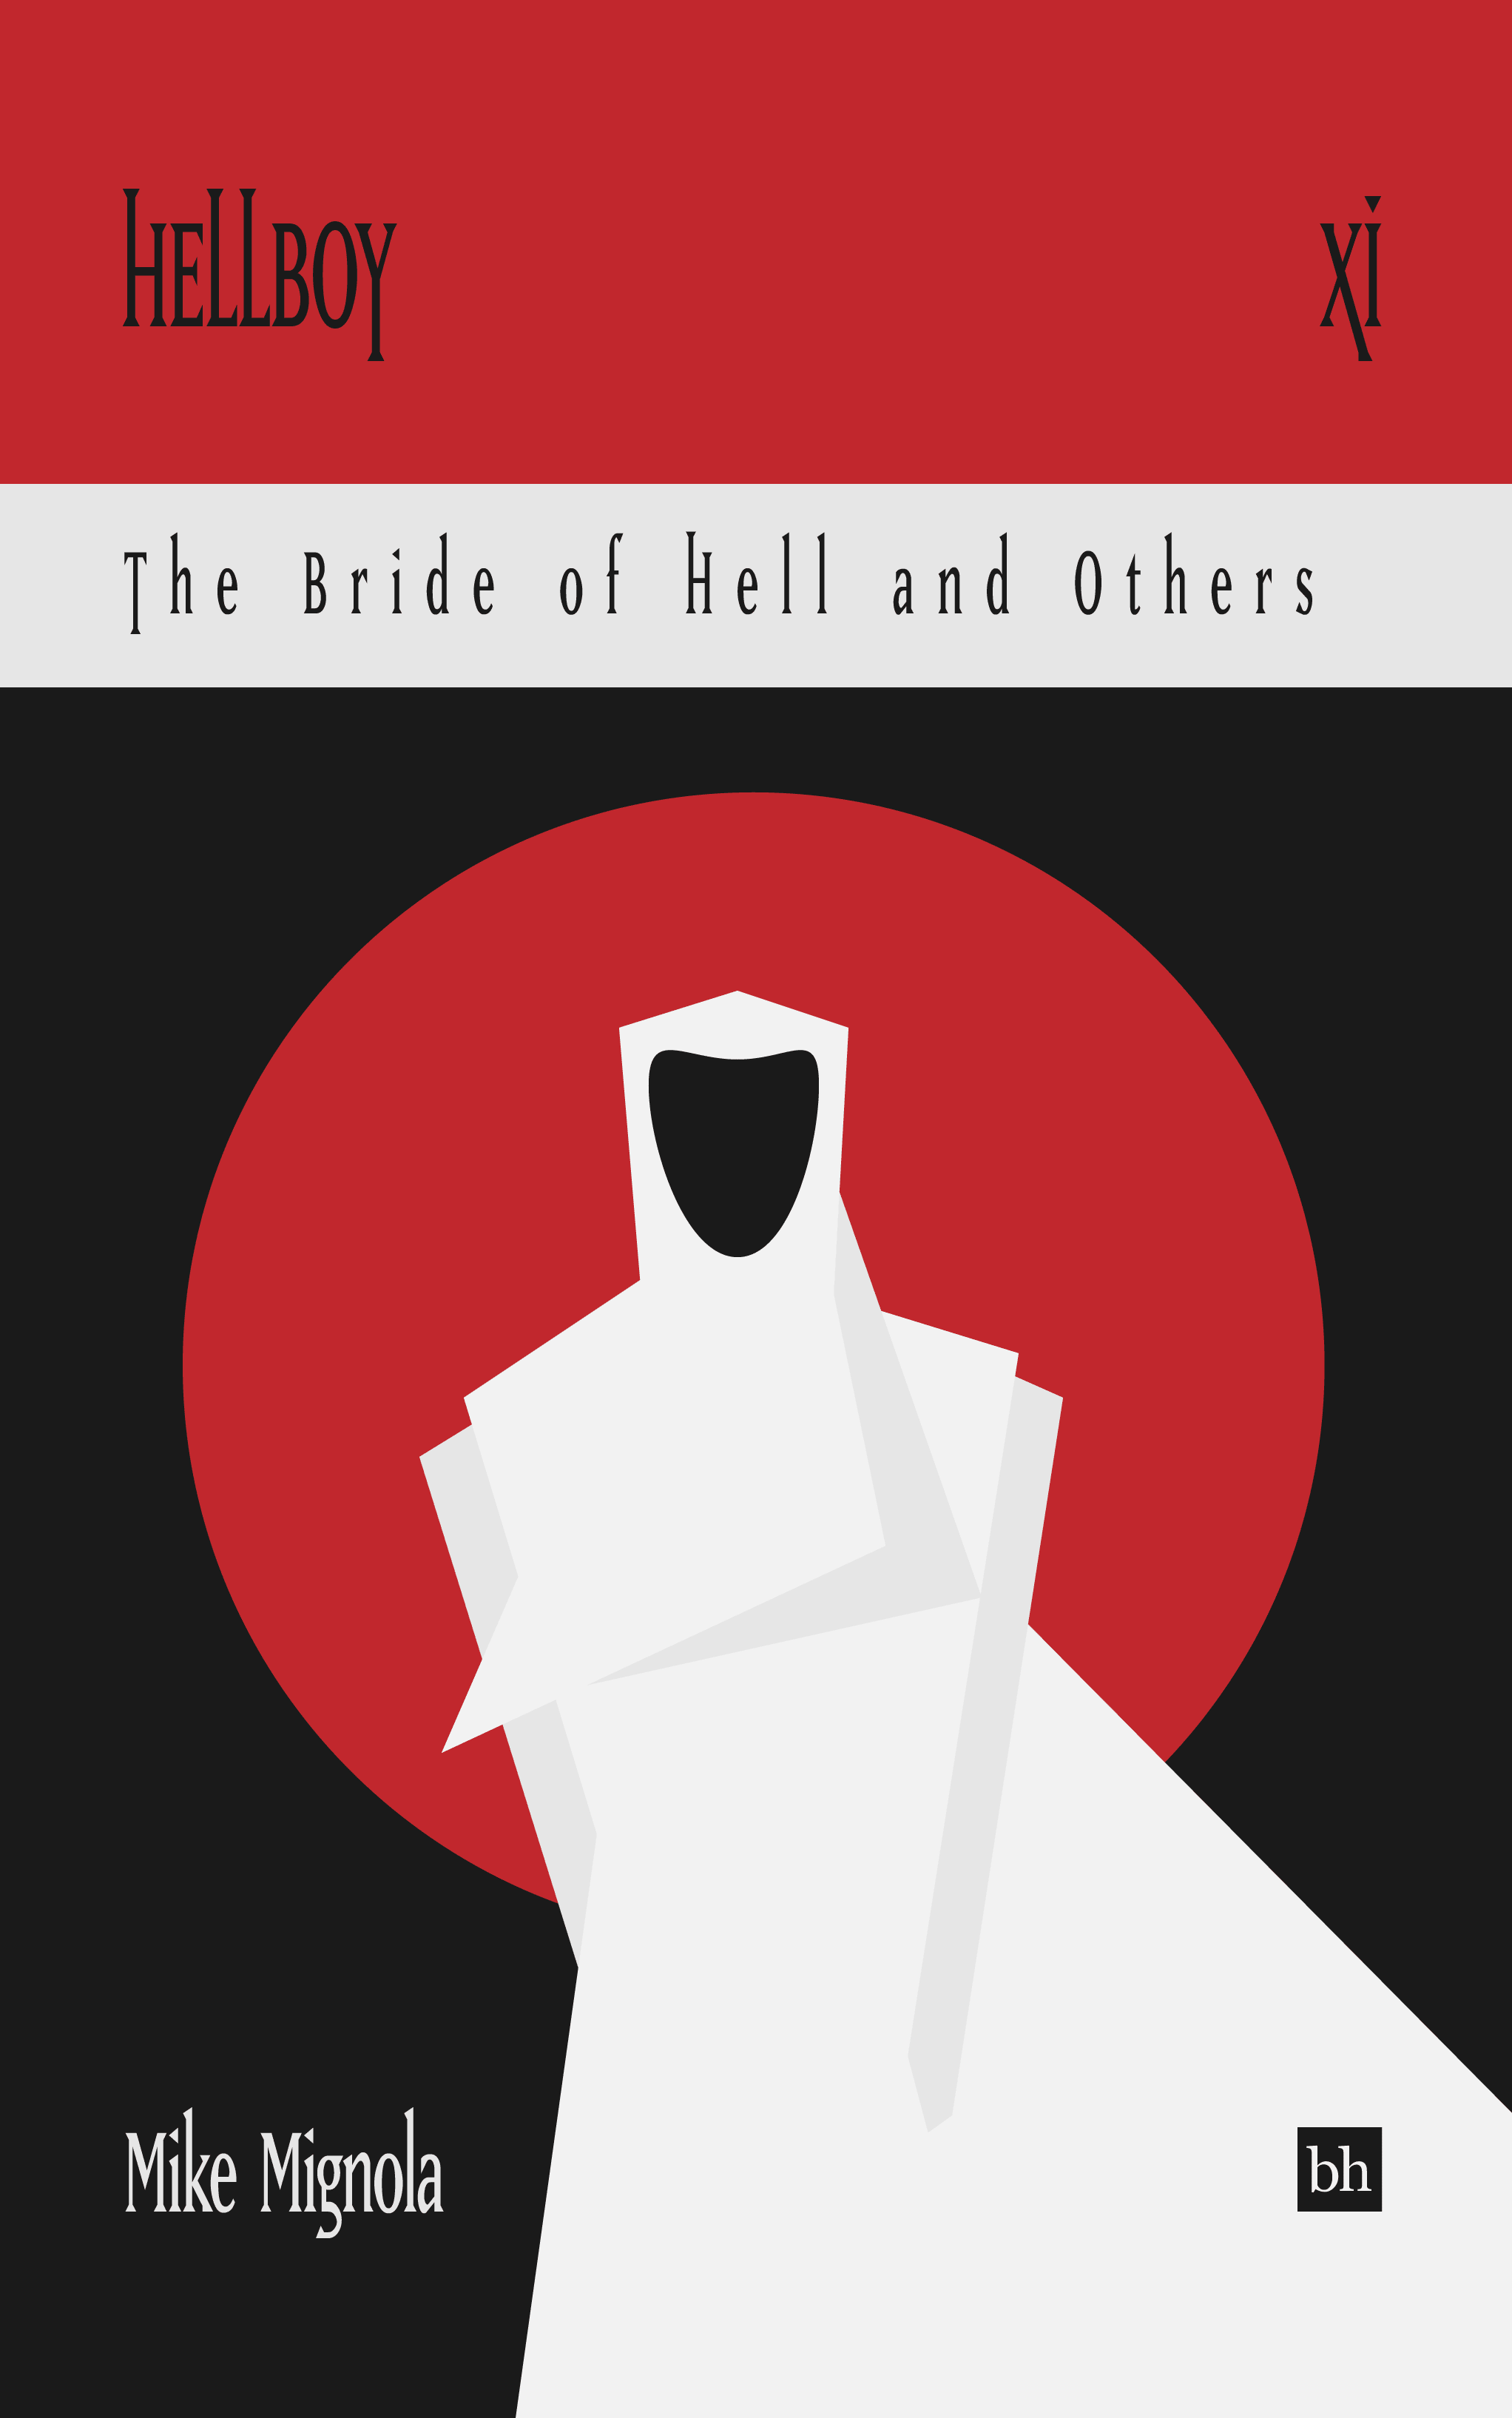 Hellboy: The Bride of Hell and Others by Mike Mignola